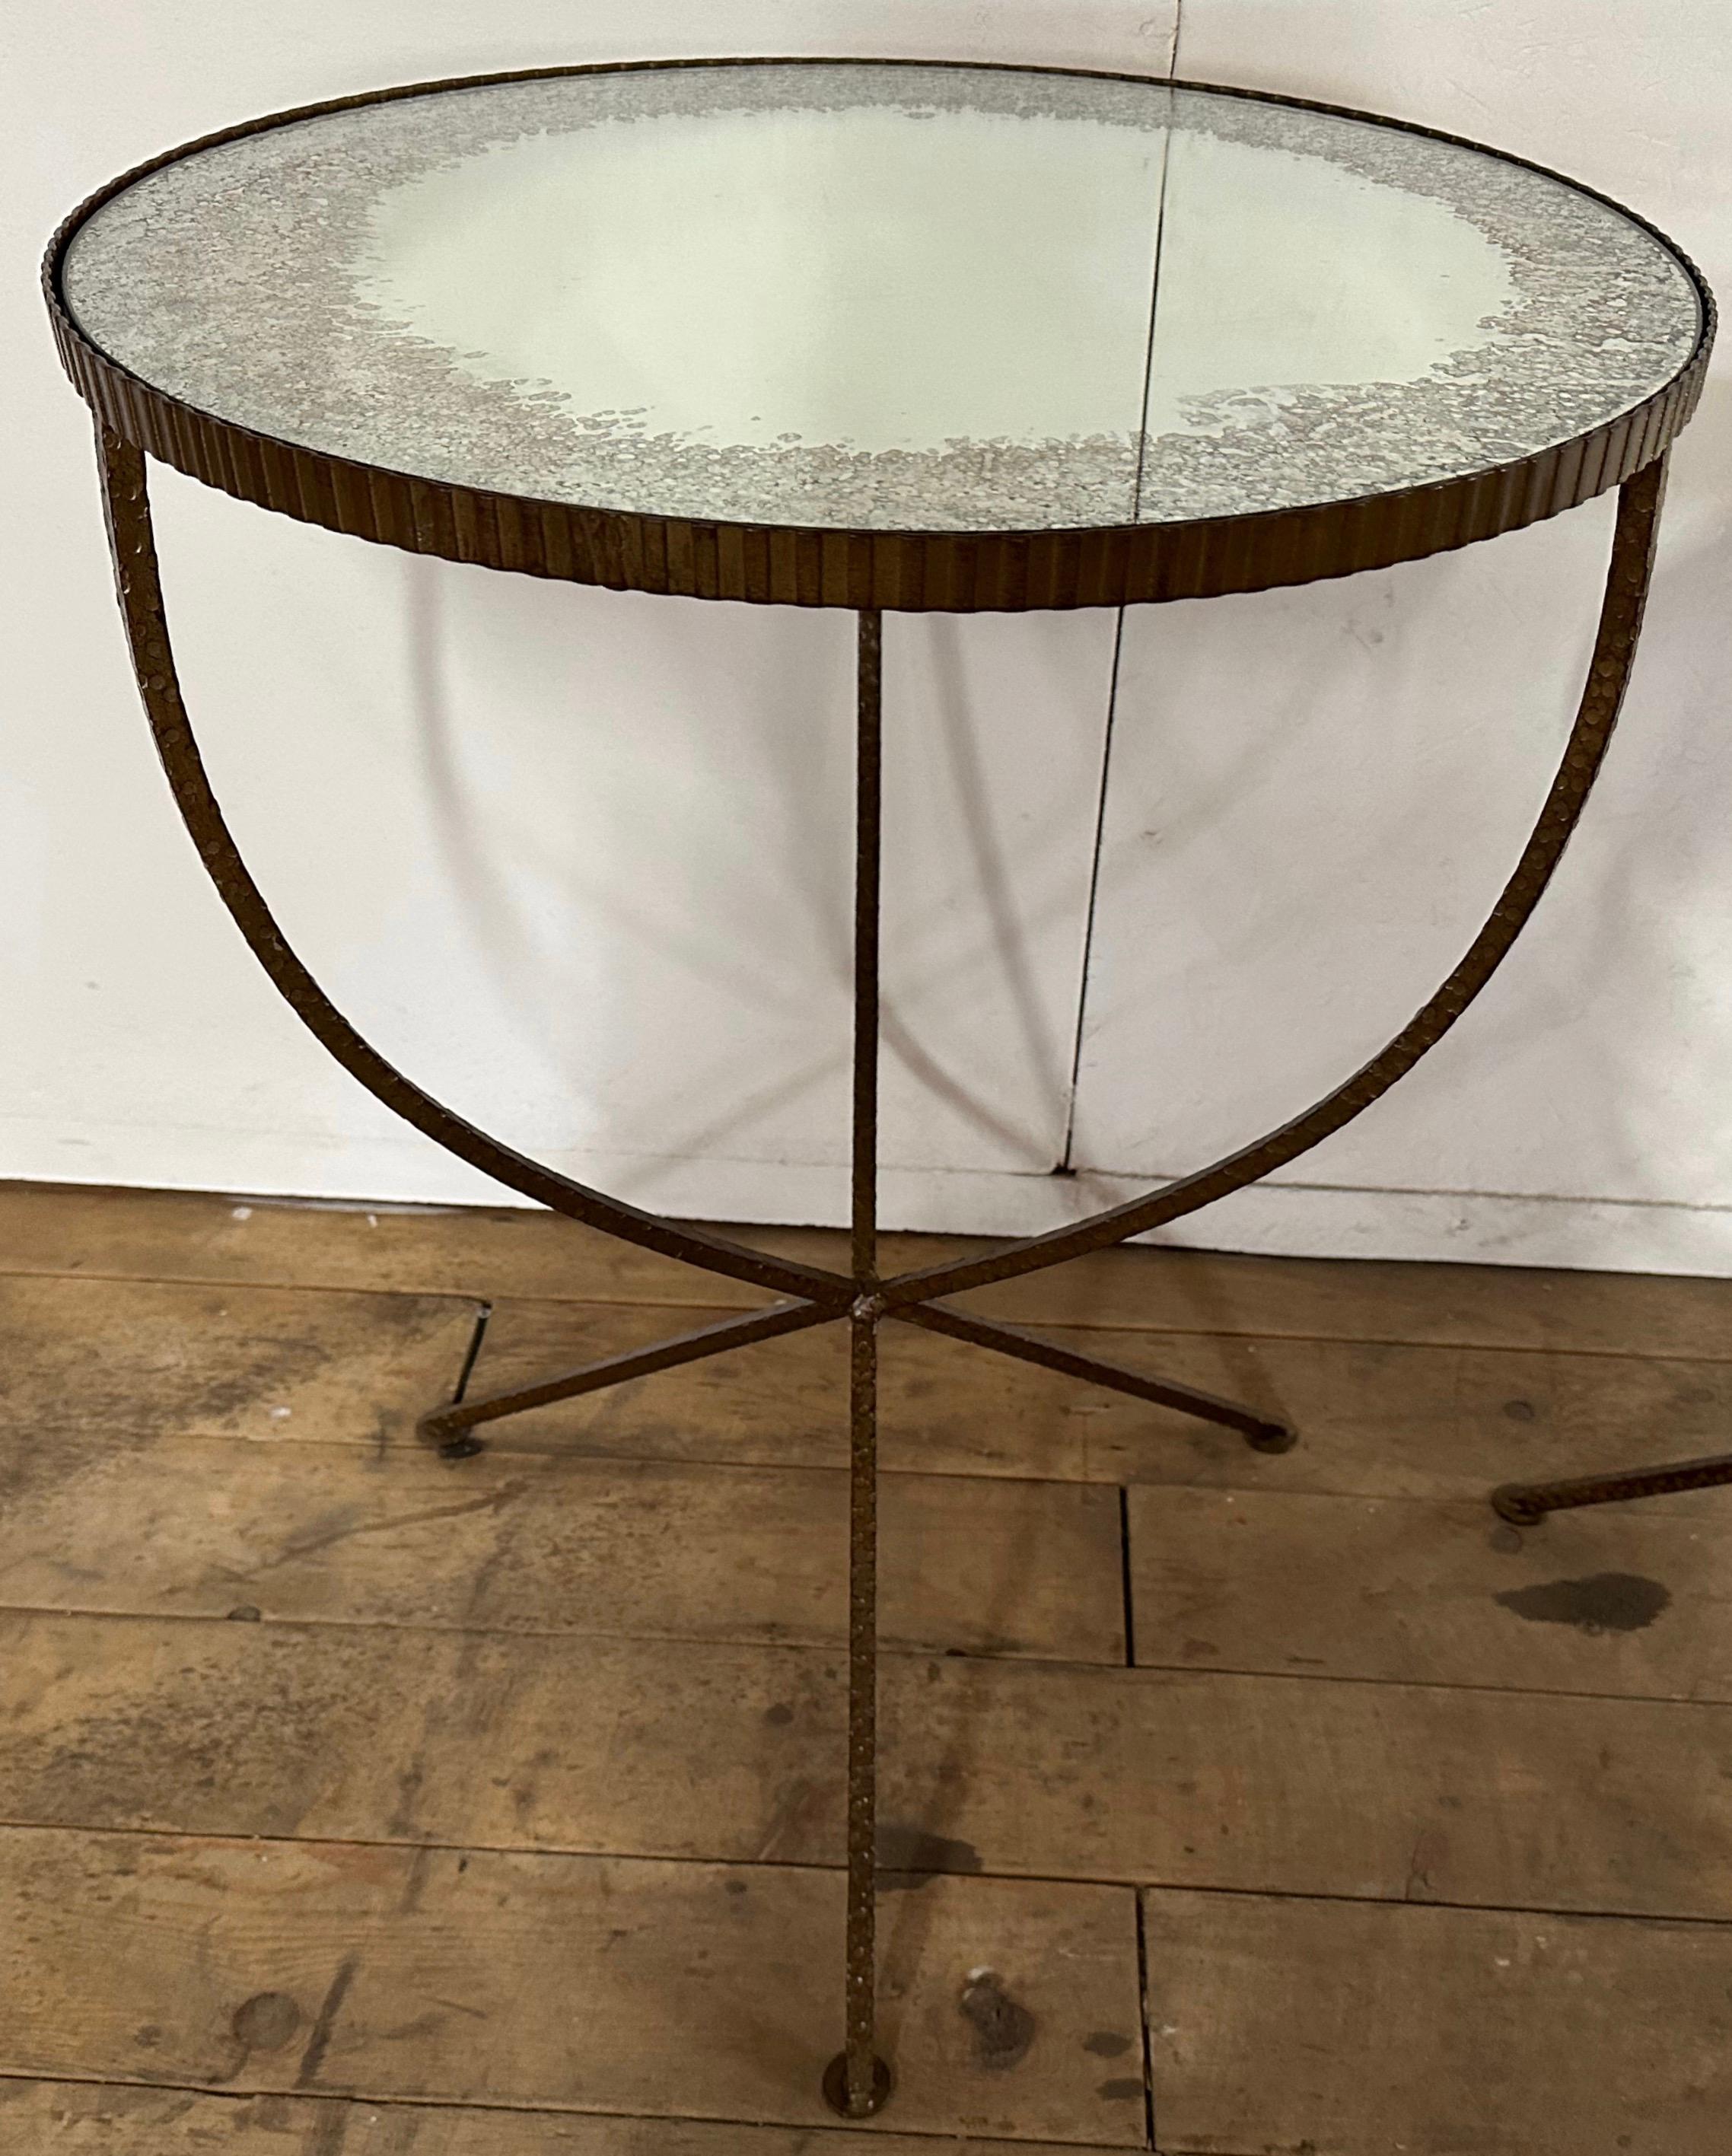 The Mid-Century Modern Round gold toned table has a hammered textured iron frame with antiqued mirror to give it character. This side, end table or accent table has the elegance in the manner of an Hollywood Regency or neoclassical table.
The table